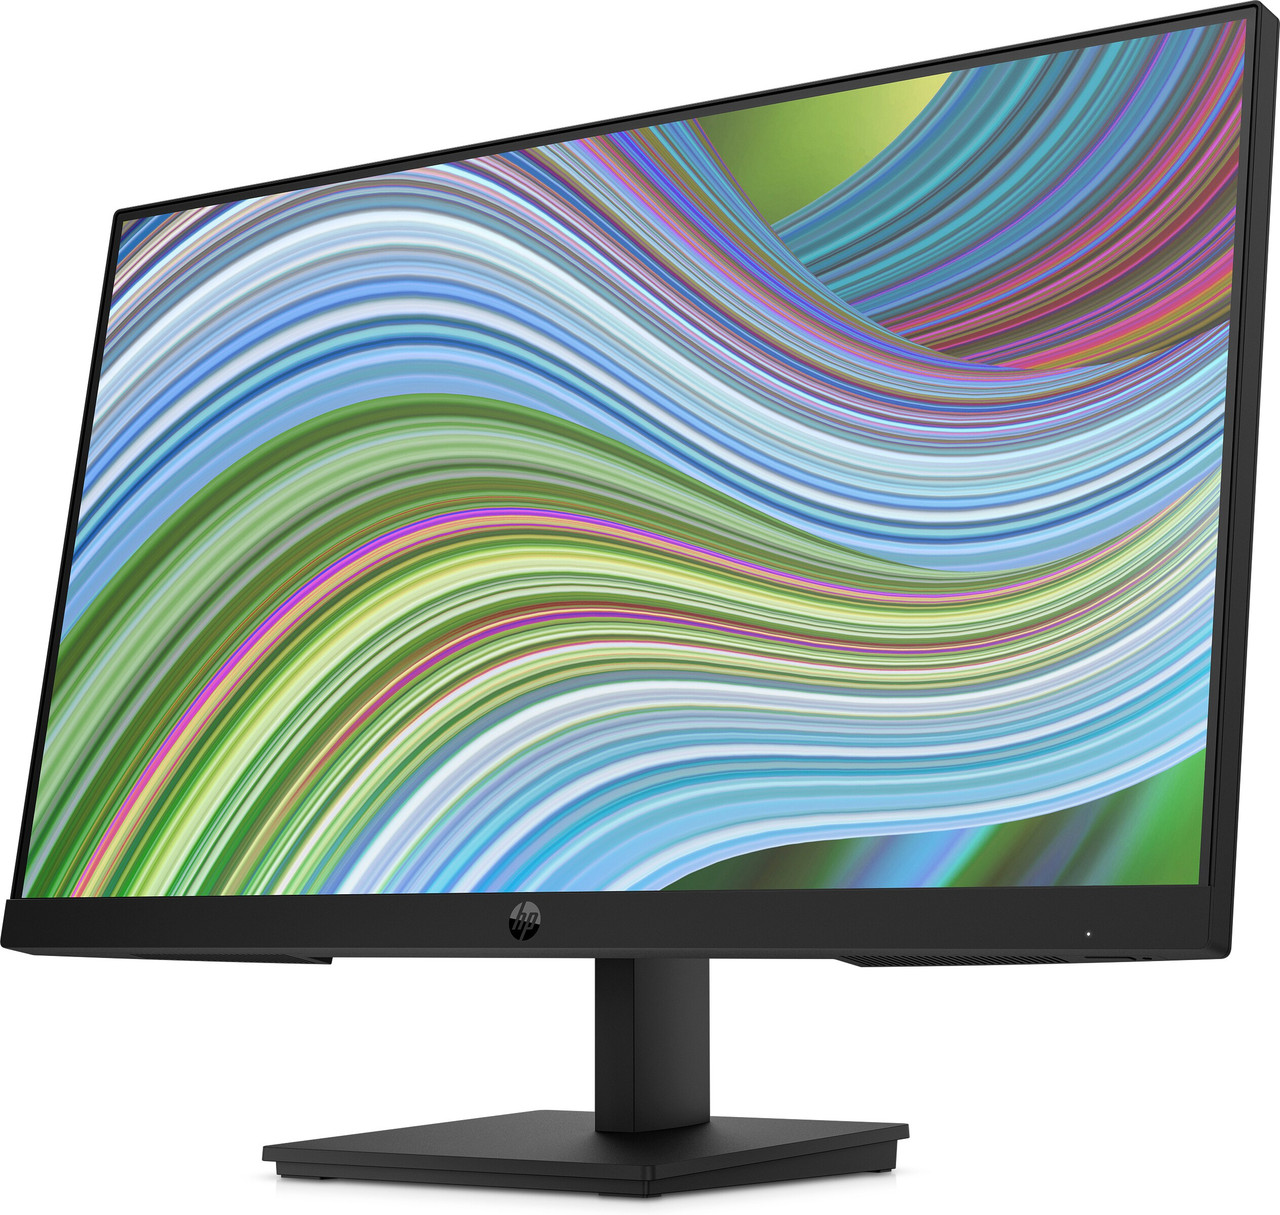 HP P24 G5 FHD Monitor​ FrontLeft